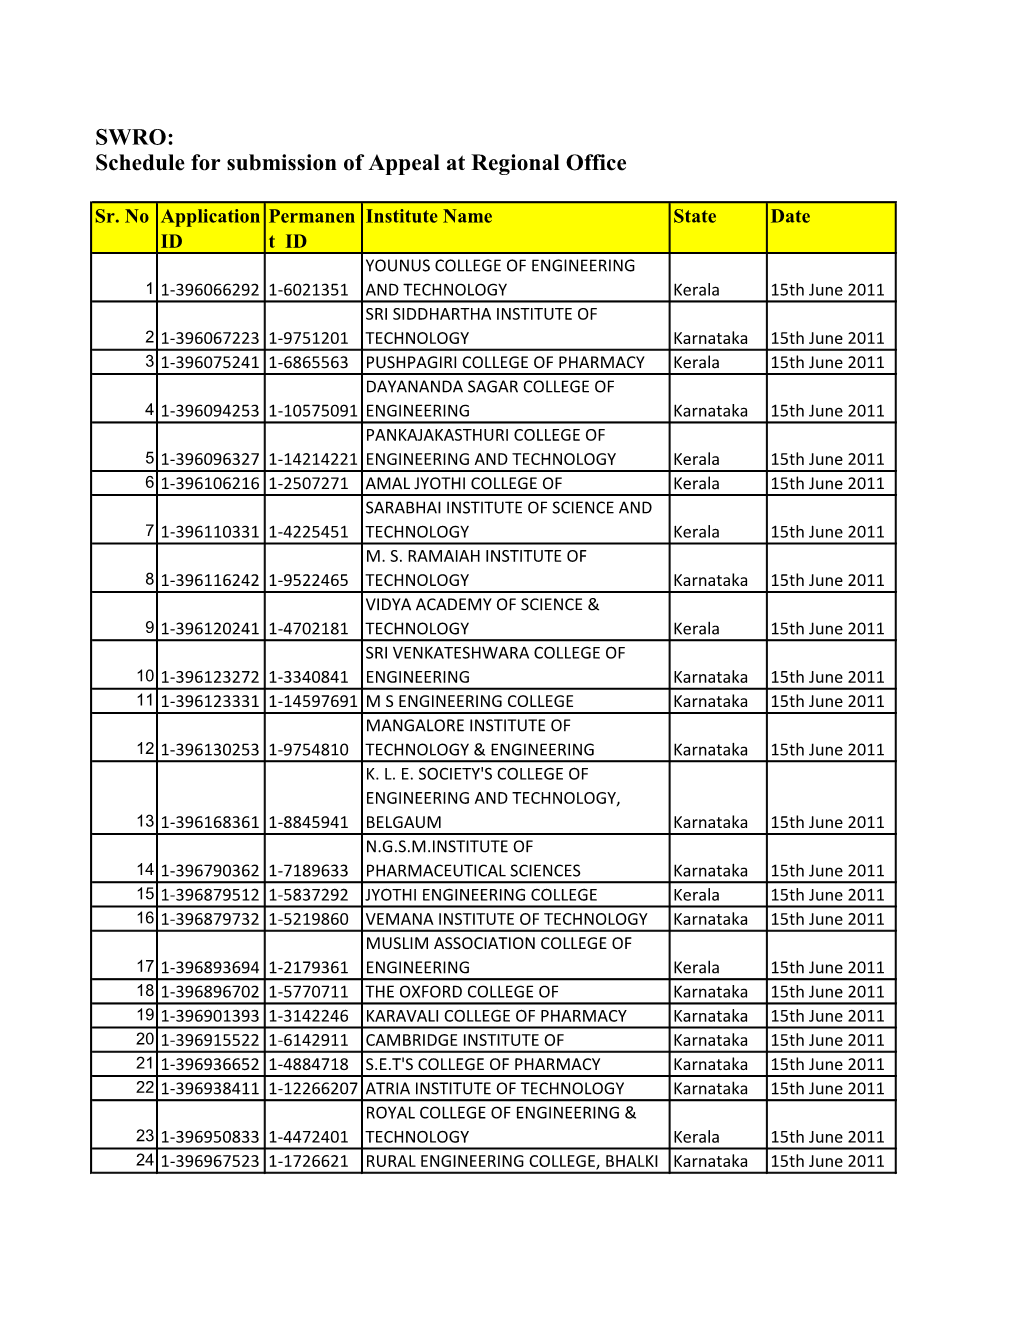 Schedule for Submission of Appeal at Regional Office SWRO